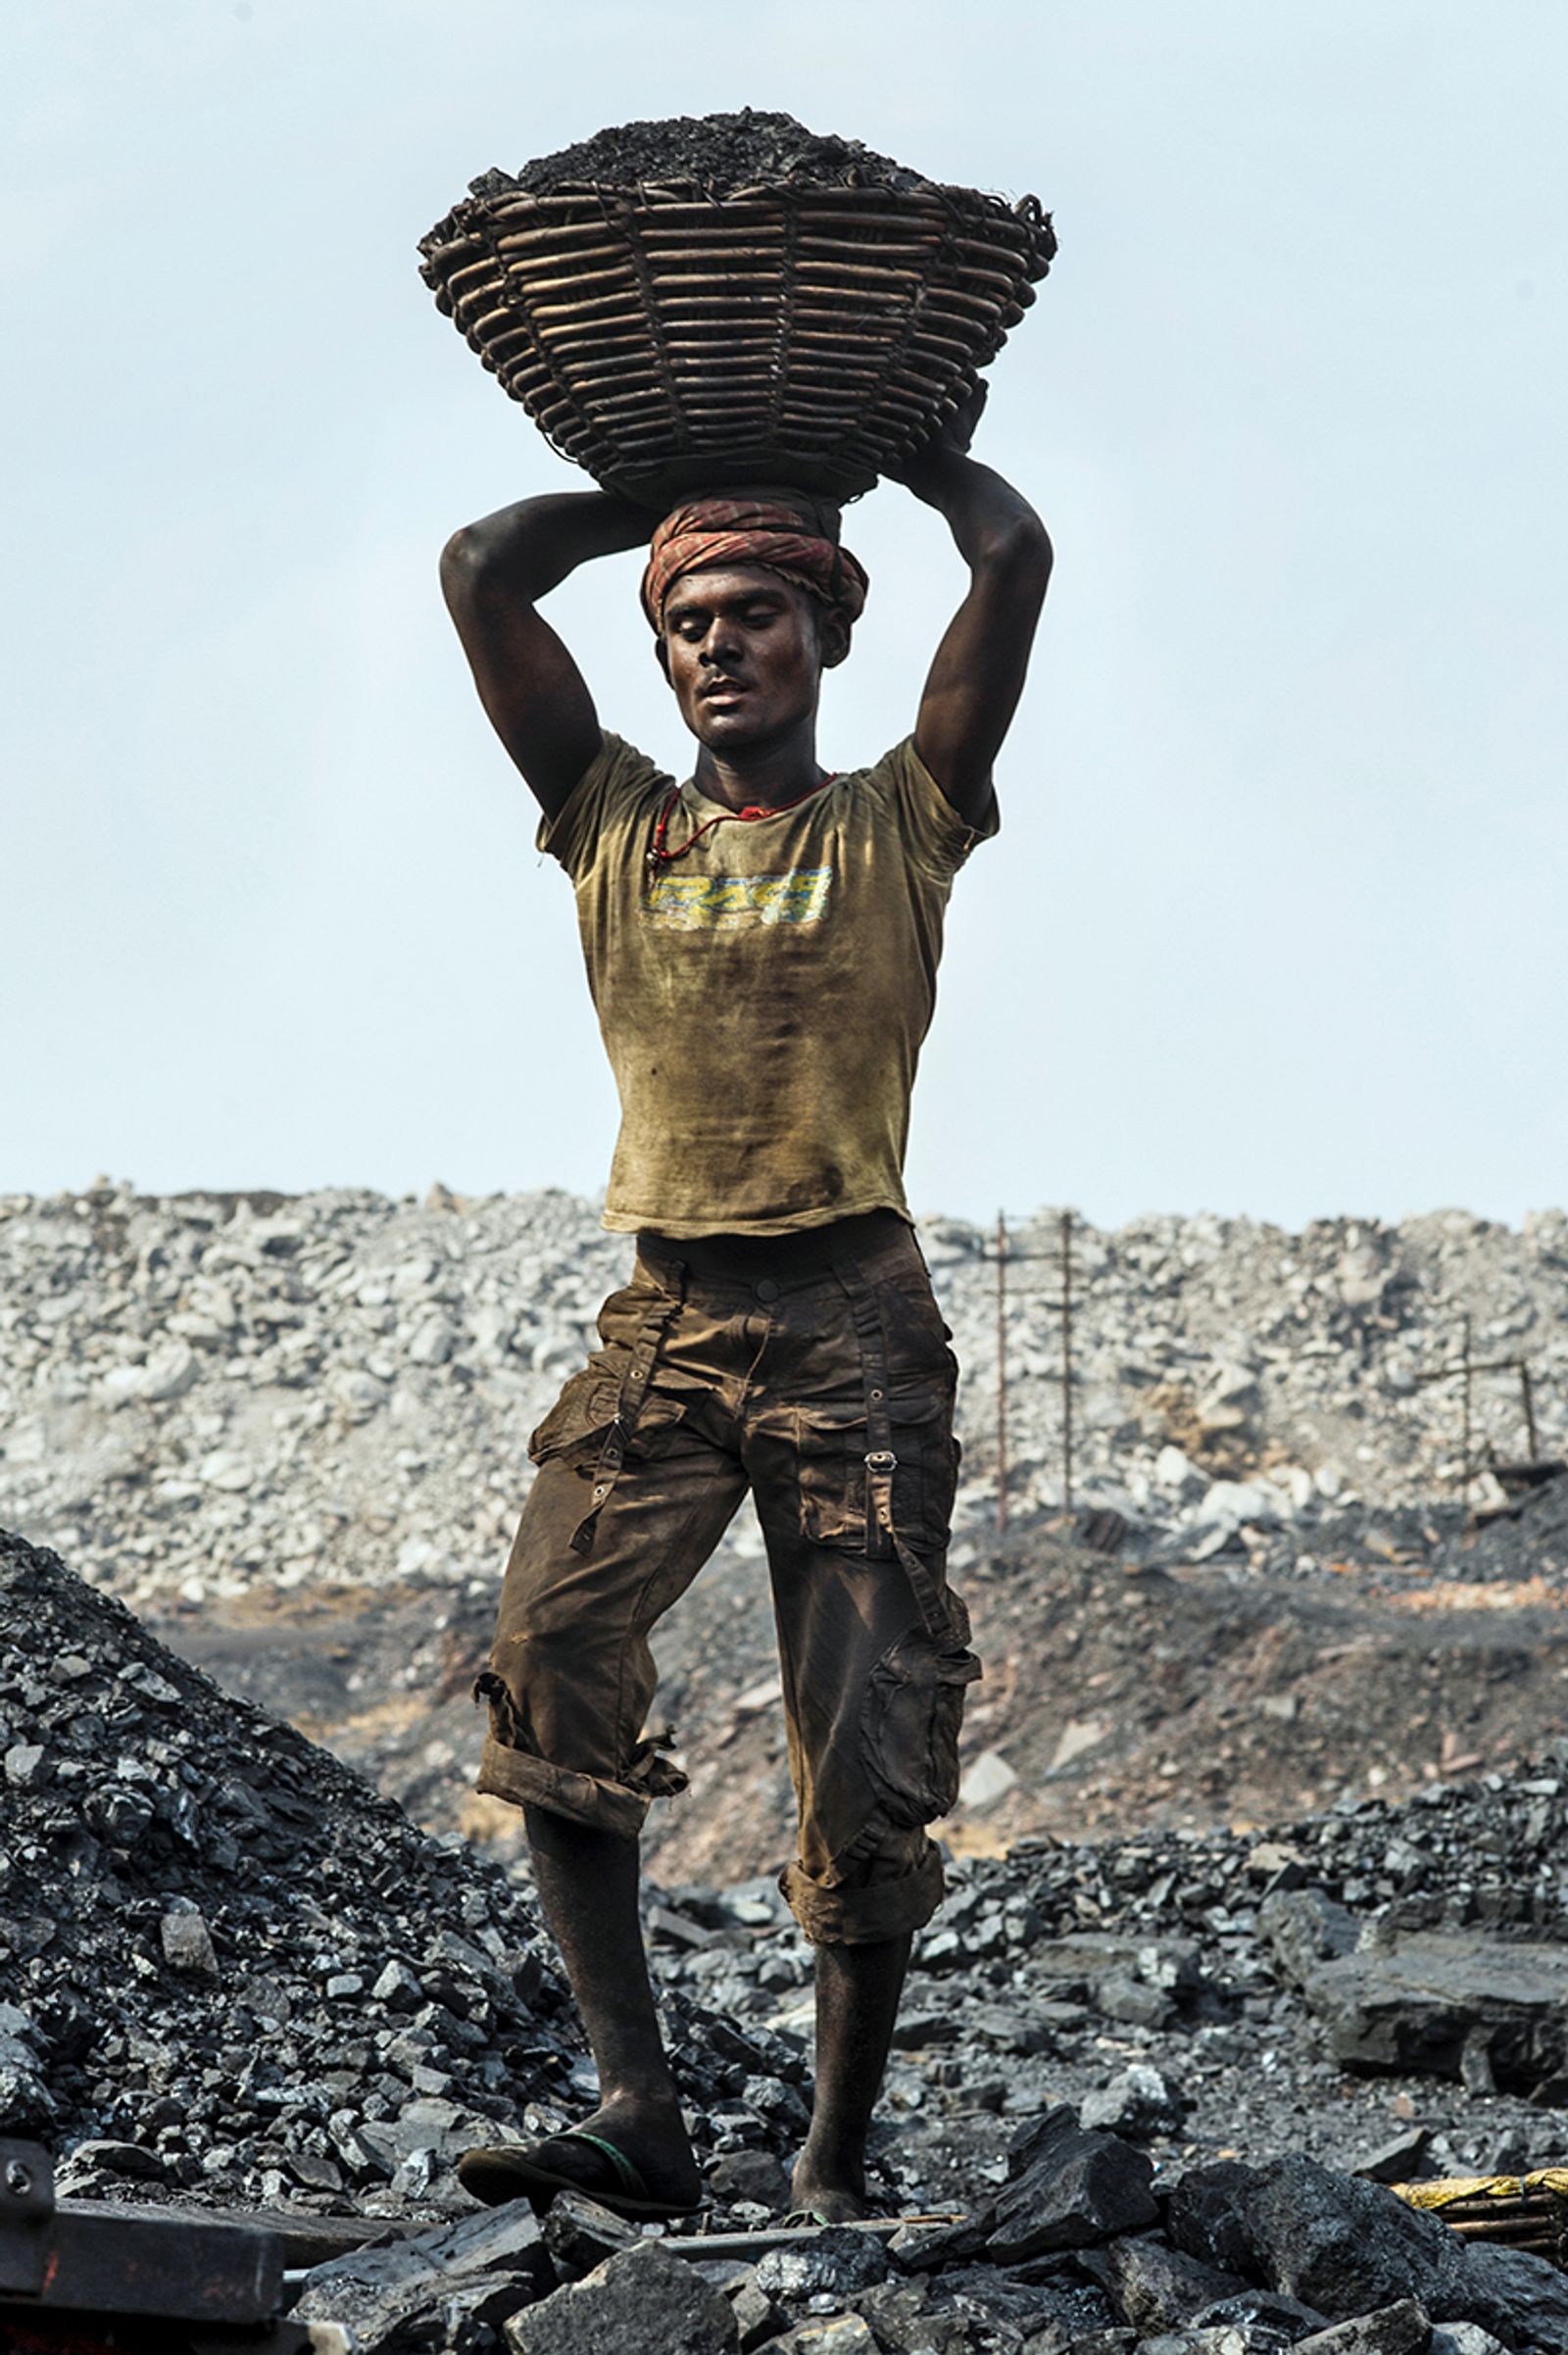 © Valerie Leonard - ATLASAt around 8 am, some of them are paid 1$ a day to load manually the coal in the trucks.